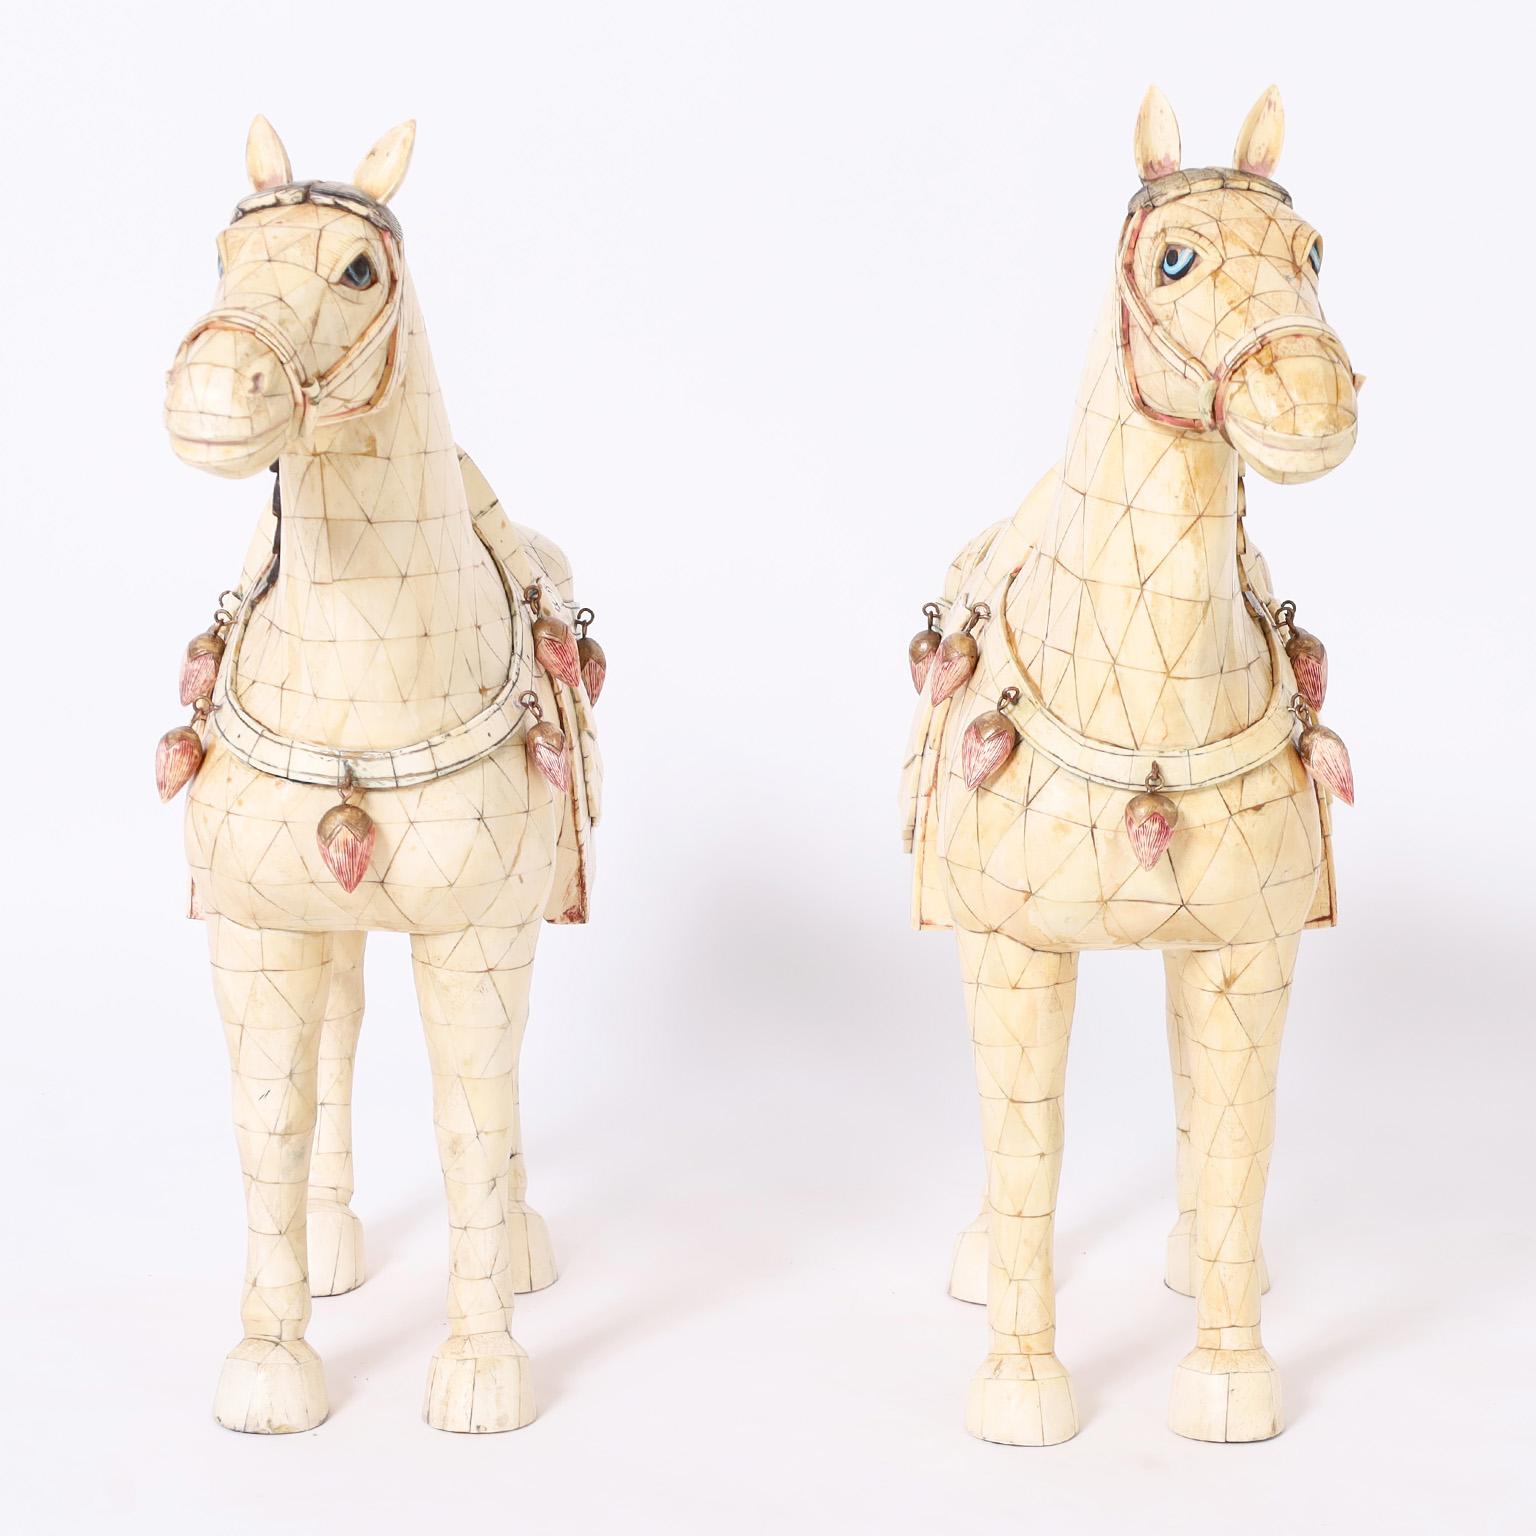 With a reference to the Tang Dynasty an impressive pair of Chinese horses, hand crafted in a tessellated technique with carved bone as a symbol of wealth, longevity and wisdom.